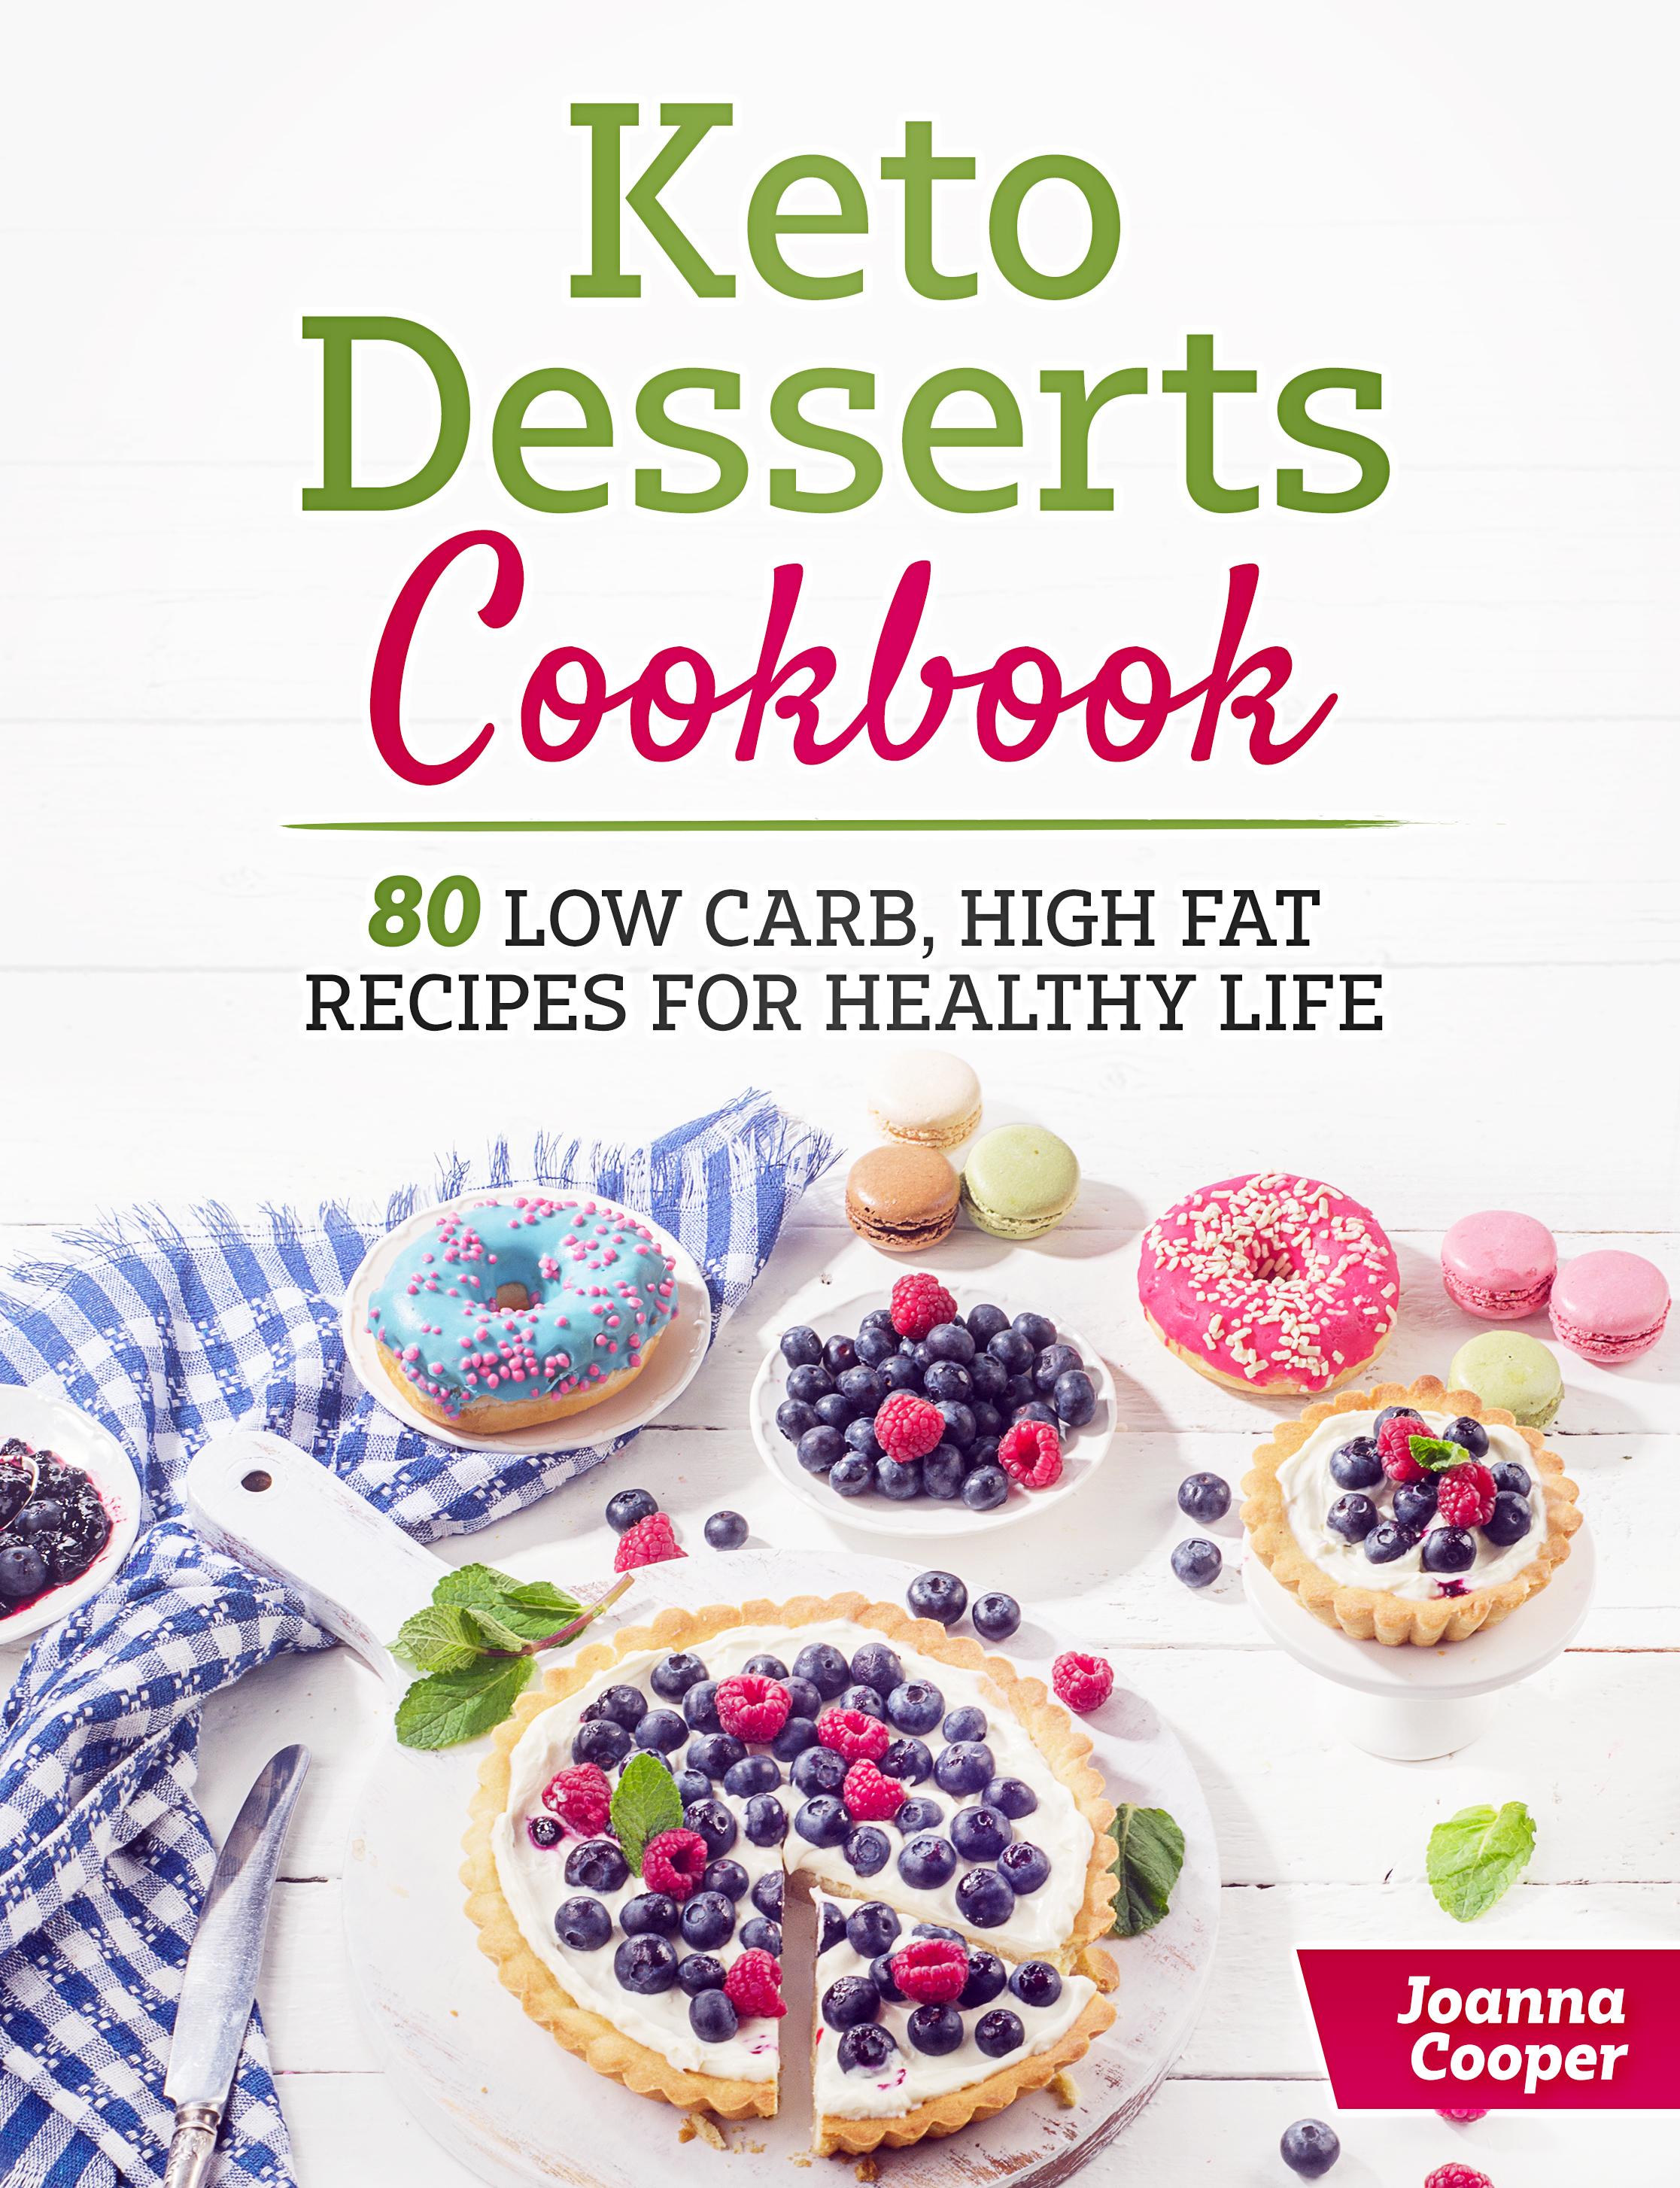 FREE: Keto Desserts Cookbook: 80 Low Carb, High Fat Recipes for Healthy Life by Joanna Cooper